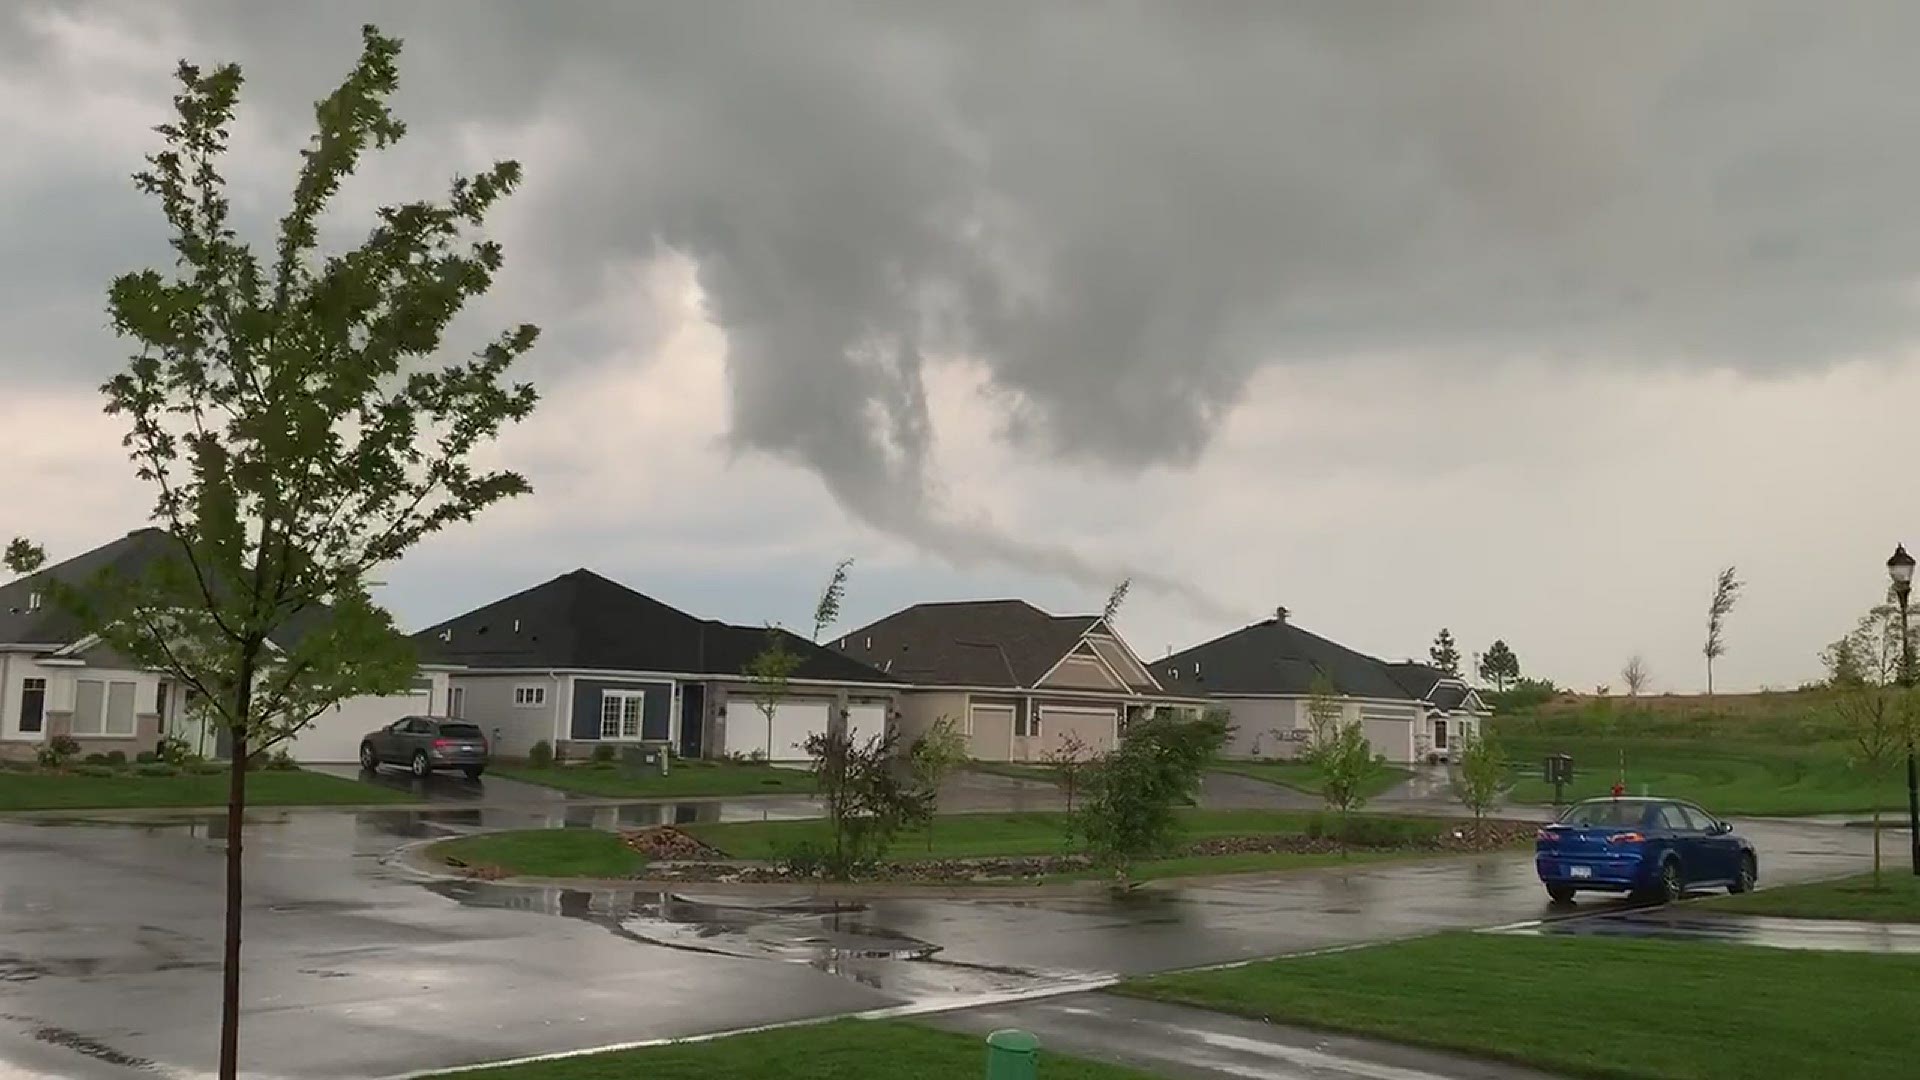 Tornado in Cologne, MN on 8-14-2020
Credit: Chris Ramsey